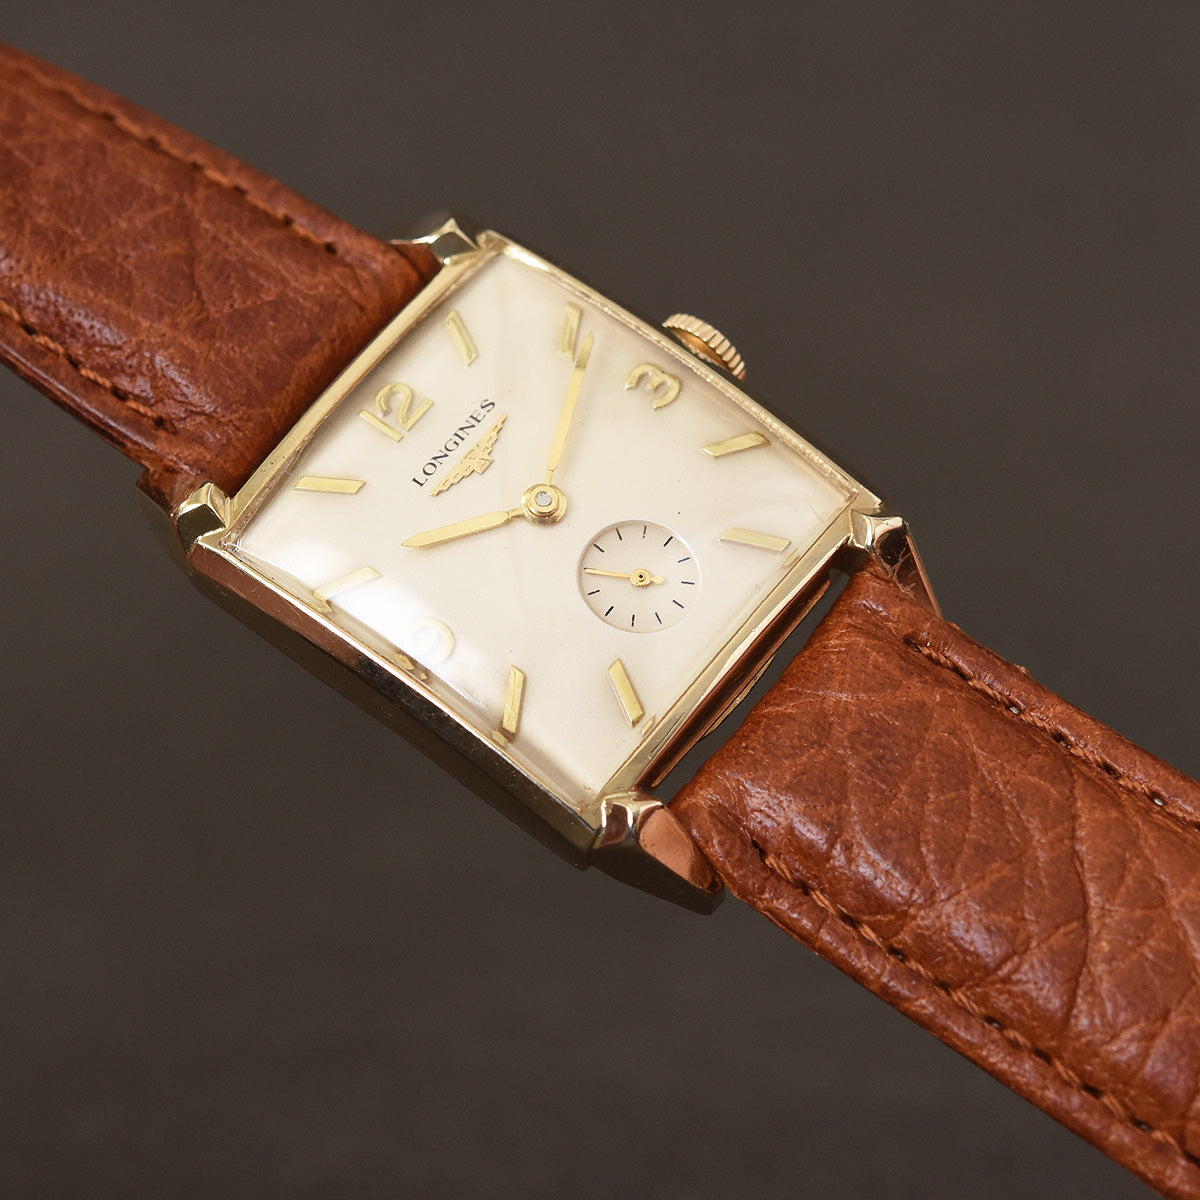 1952 LONGINES Gents 14K Solid Yellow Gold Vintage Watch